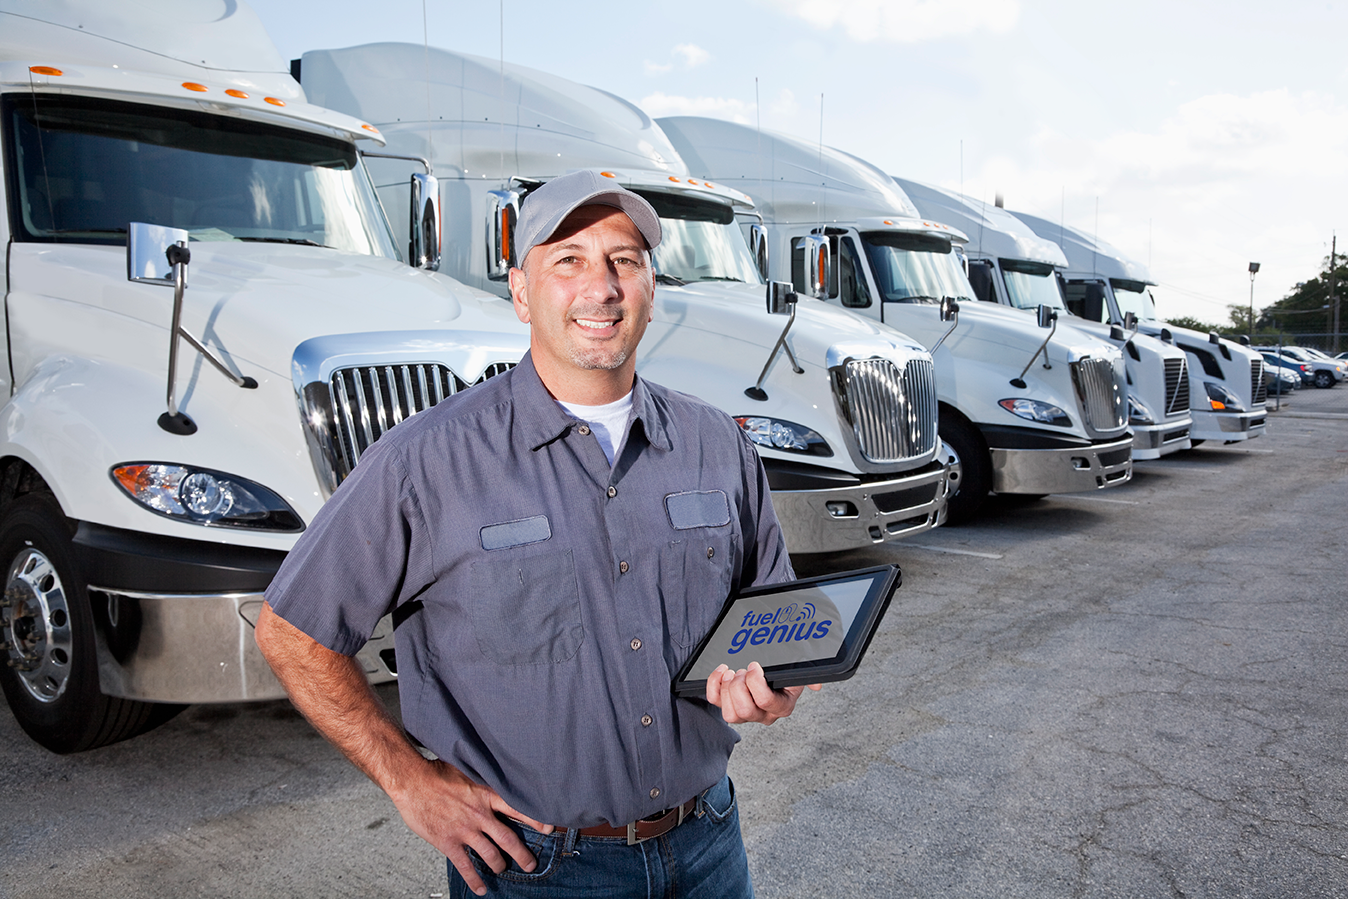 Fleet Driver picture in front of trucks in a row